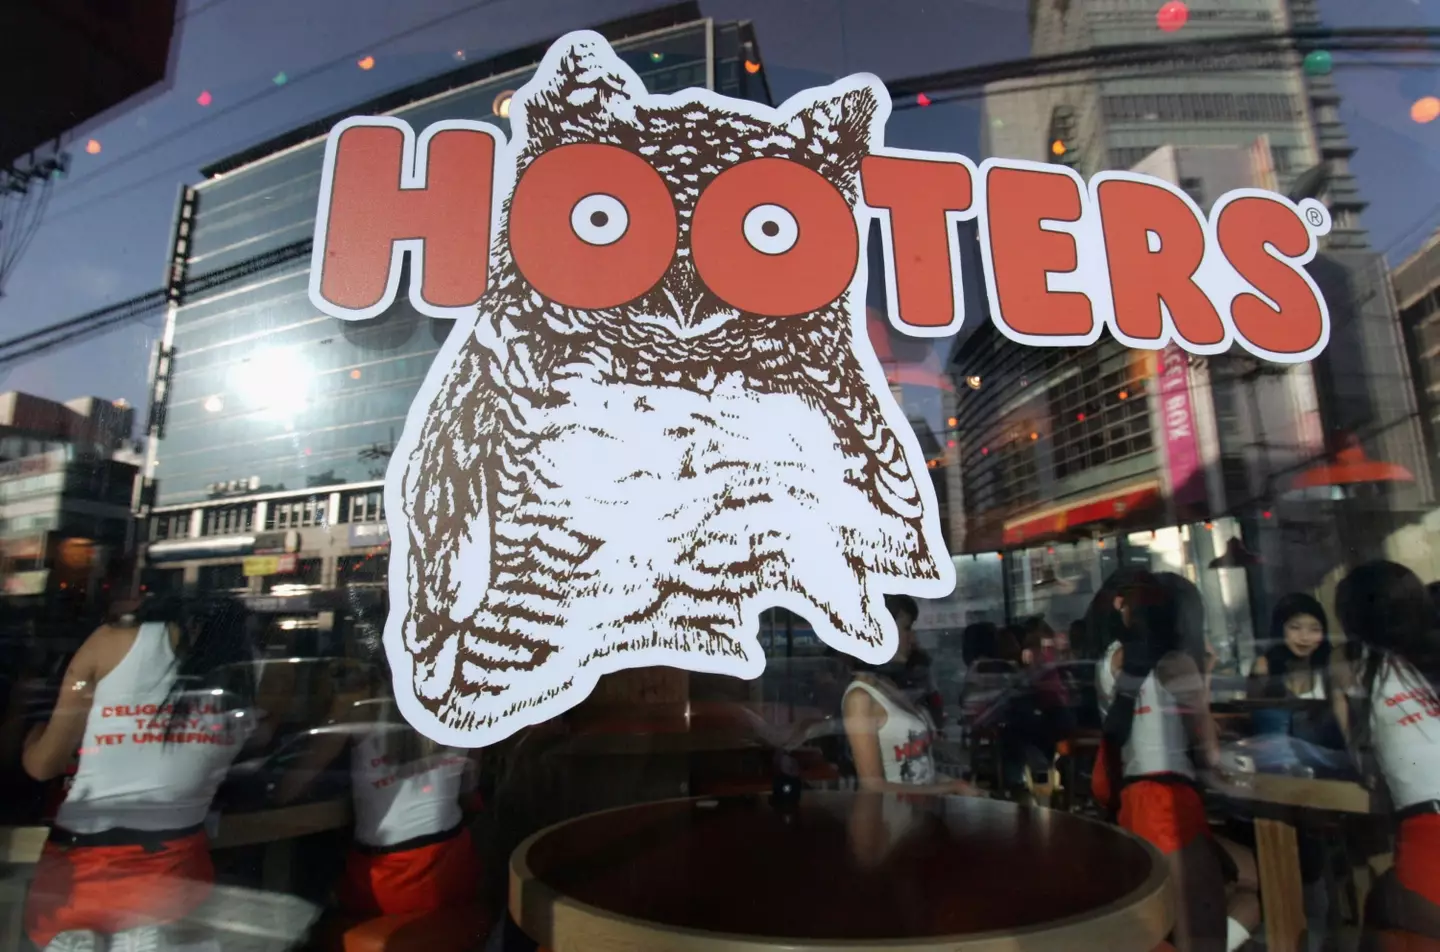 Hooters has been accused by some of 'degrading women'.